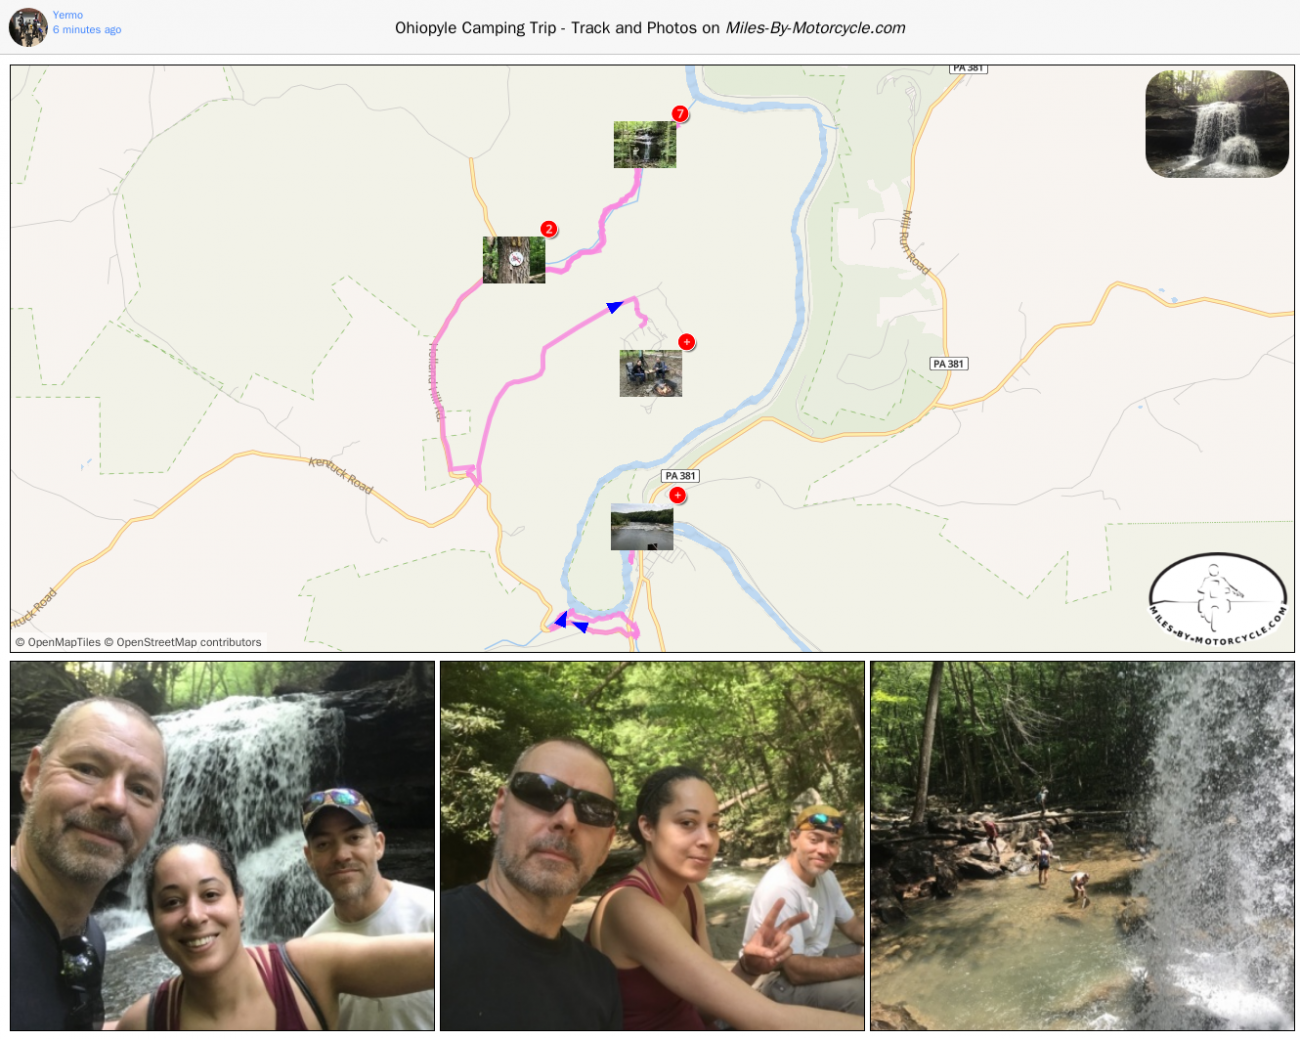 Ohiopyle Camping Trip - Track and Photos